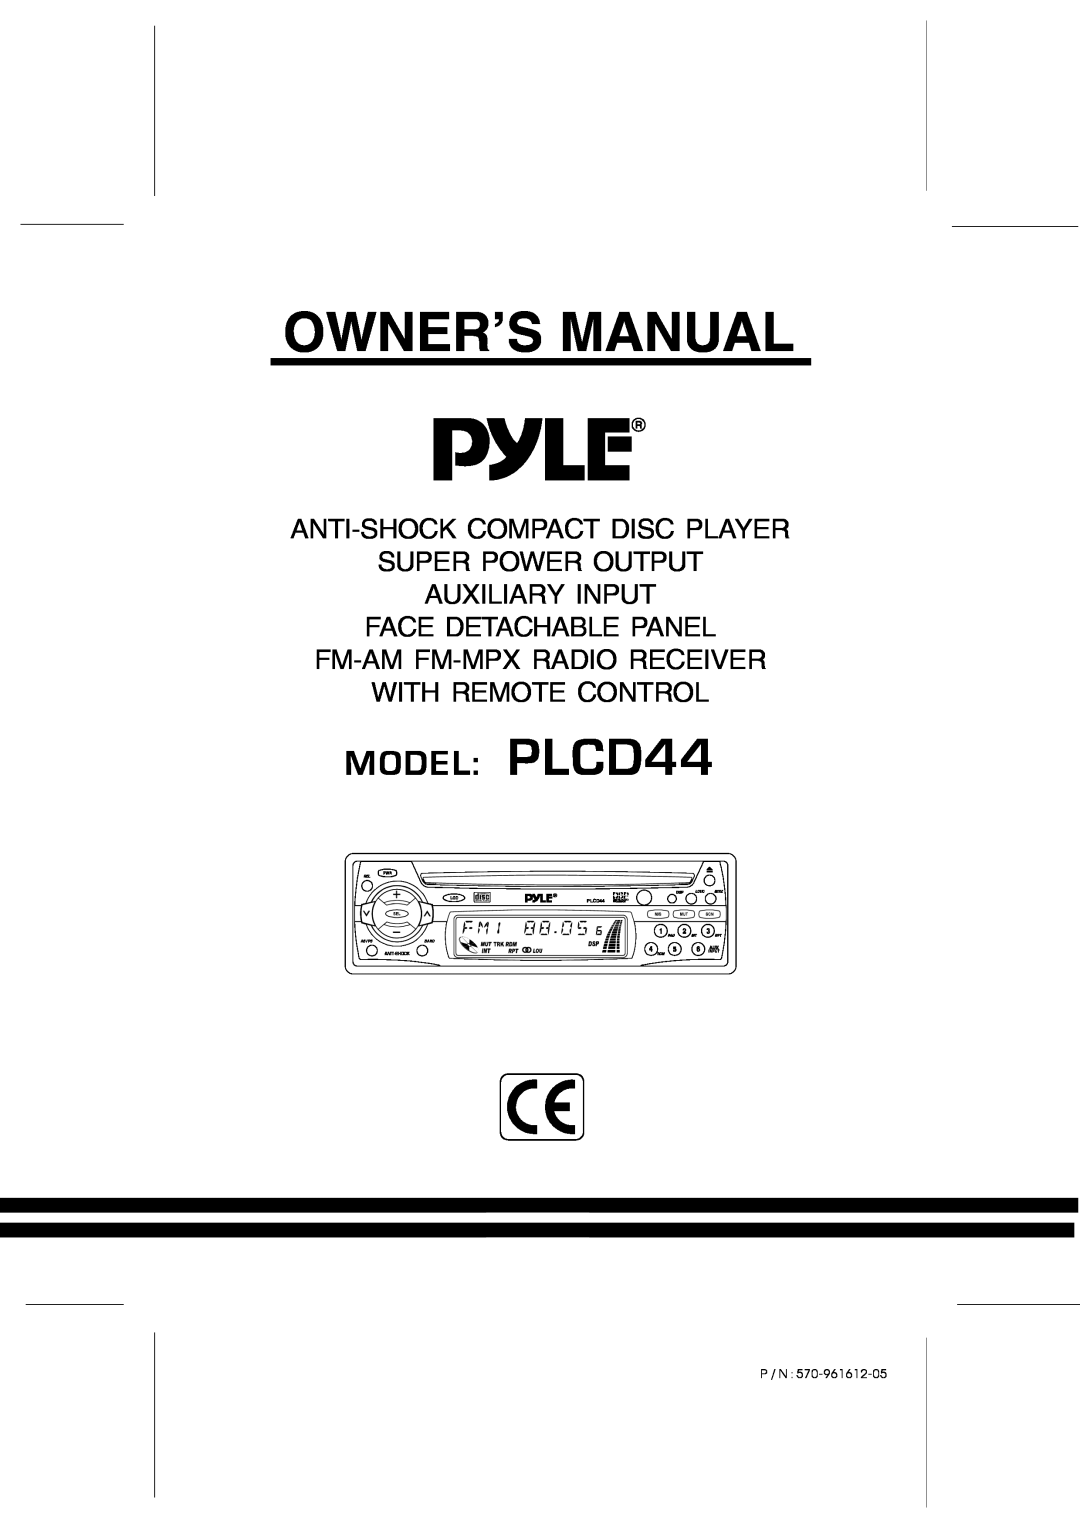 PYLE Audio owner manual Page, Owners Manual, MODEL PLCD44 